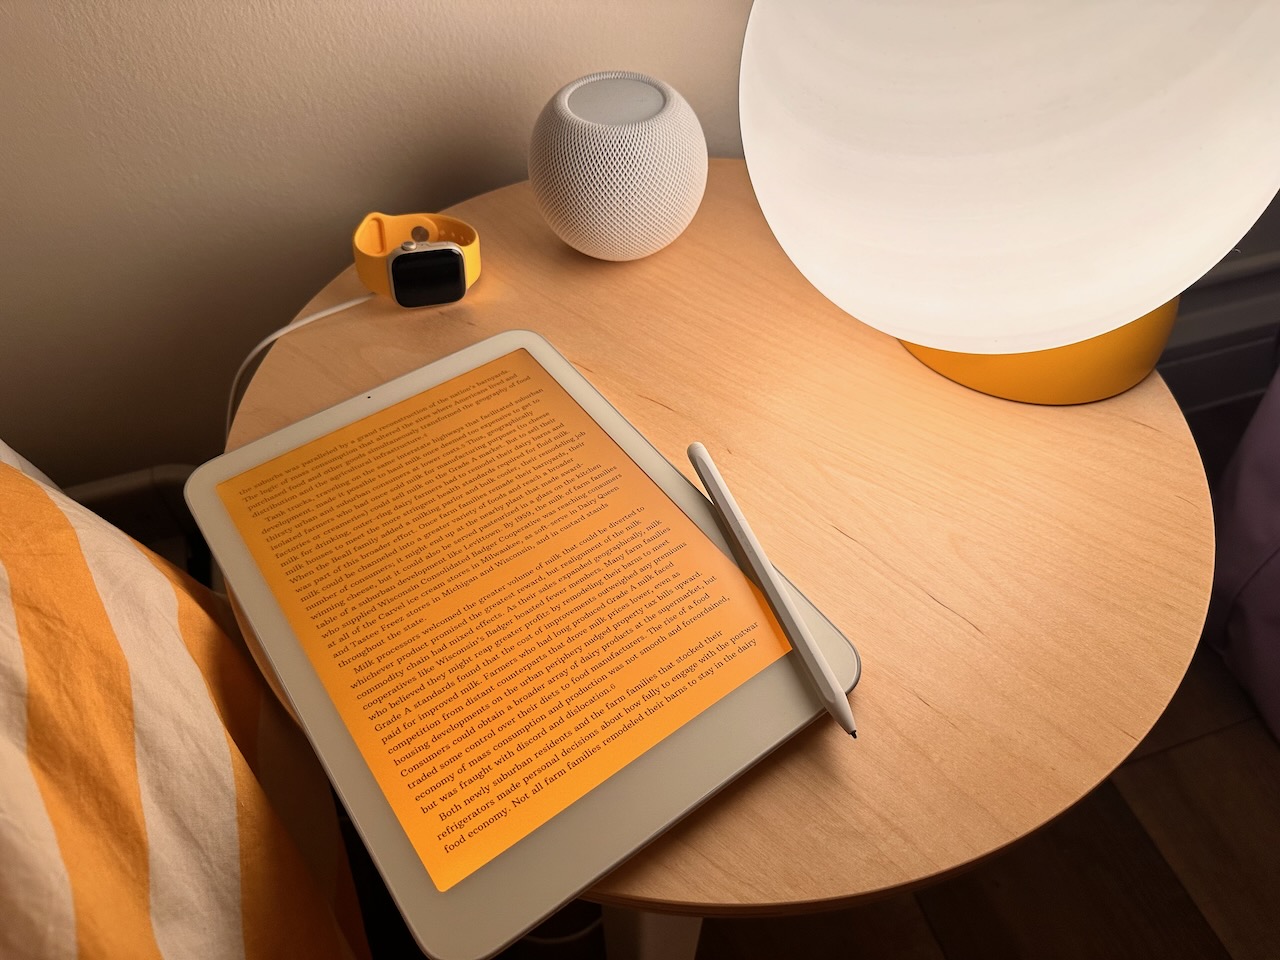 Daylight open to an ebook on my nightstand